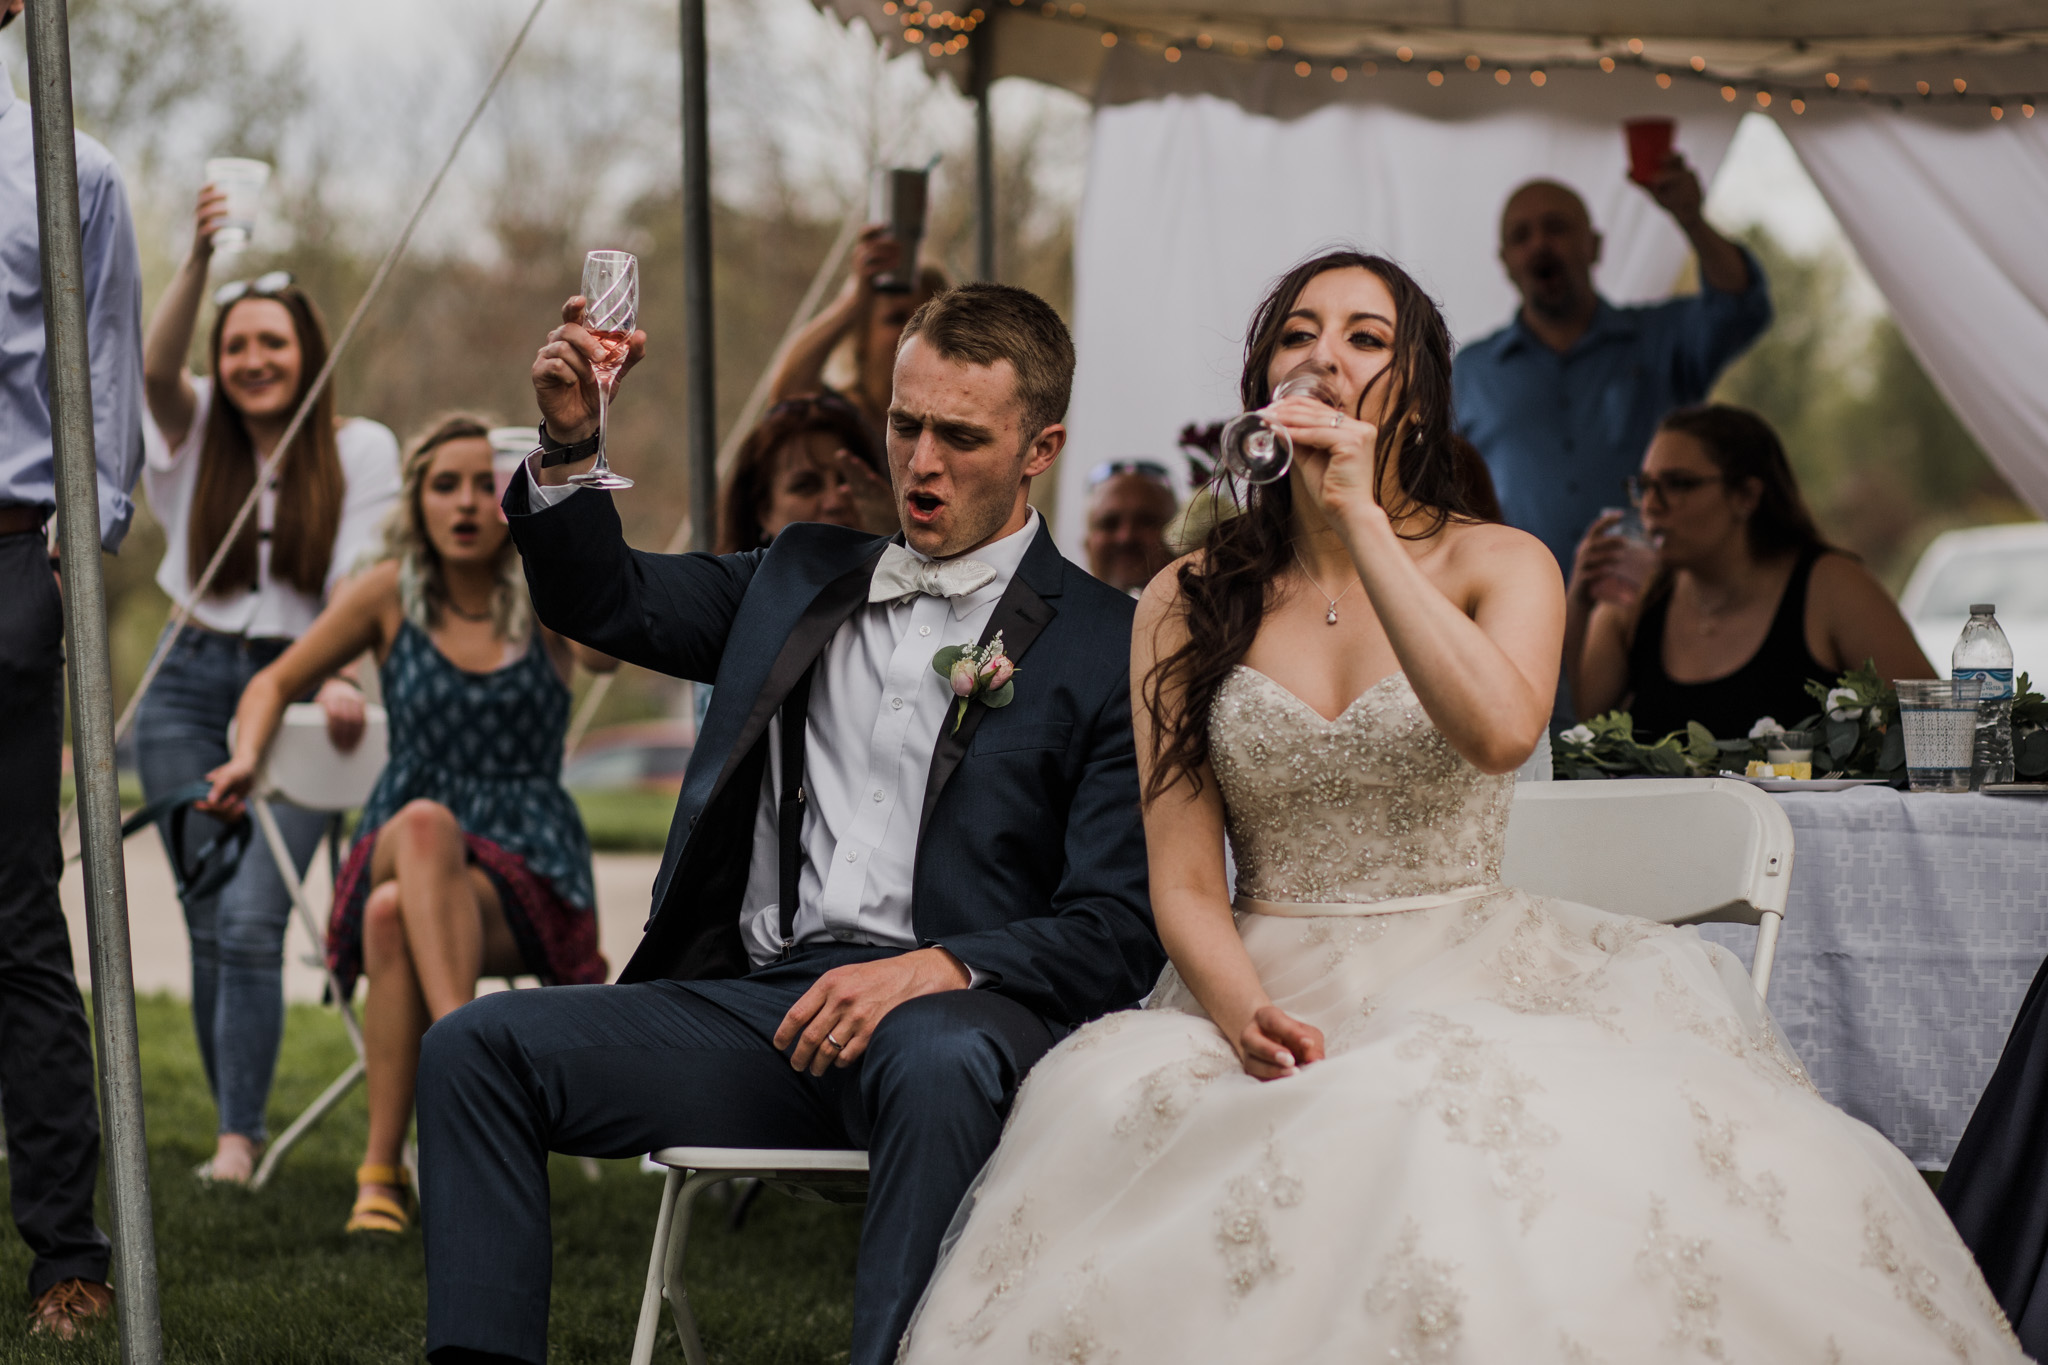 Bride and groom toasting speeches and drinking champagne during their Indiana backyard wedding.